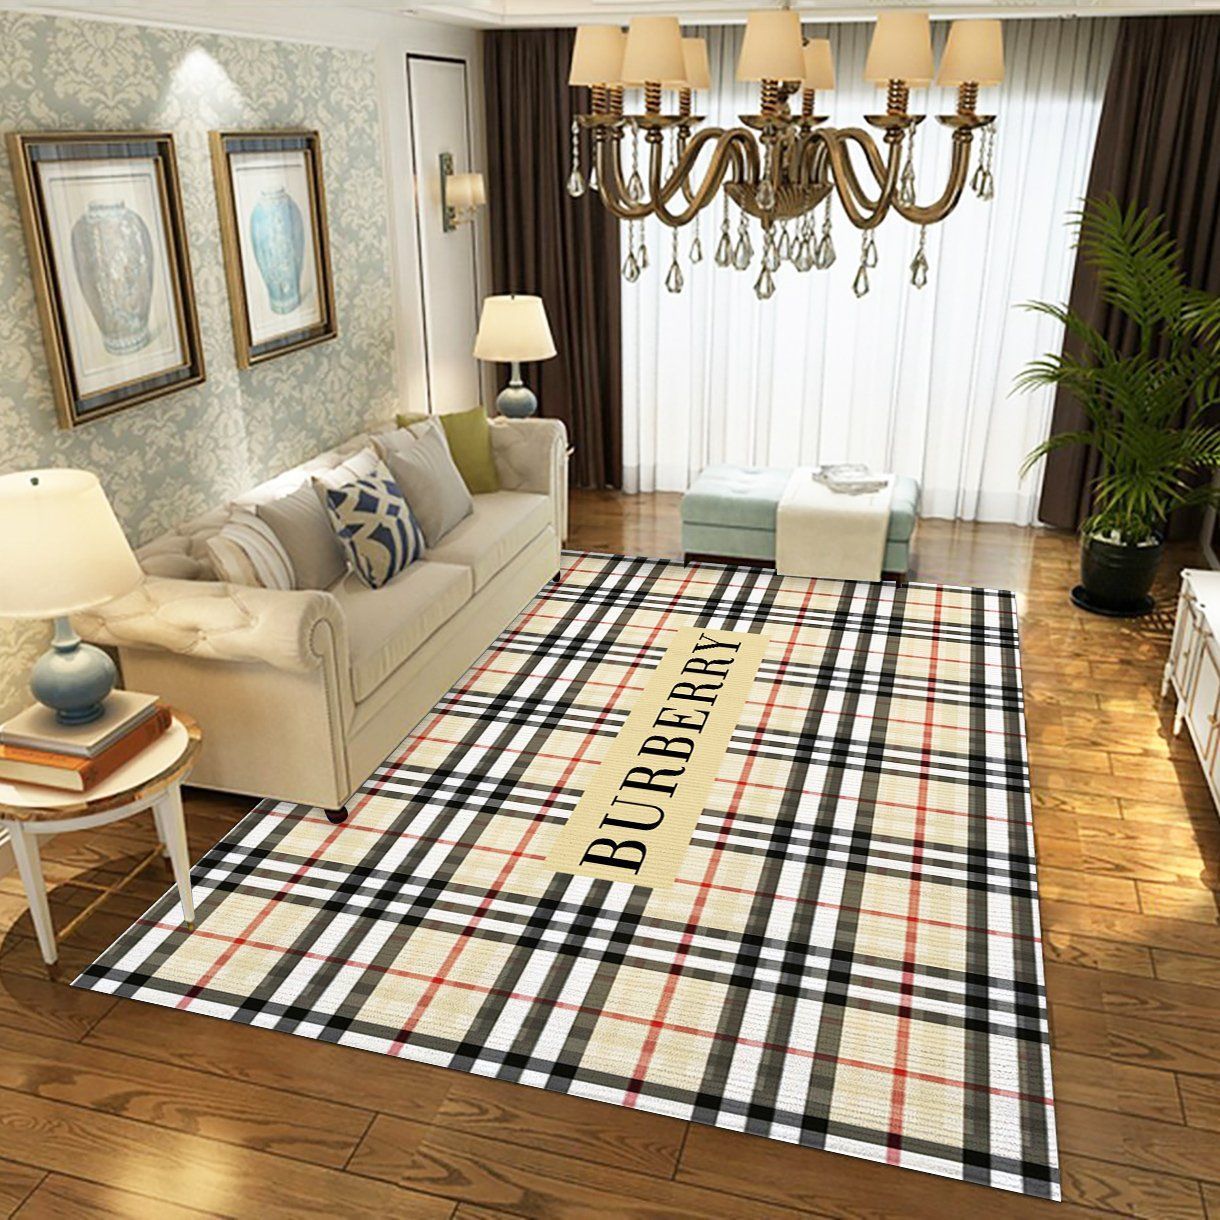 Burberry Luxury Brand 4 Area Rug Living Room And Bedroom Rug Us Gift Decor VH3